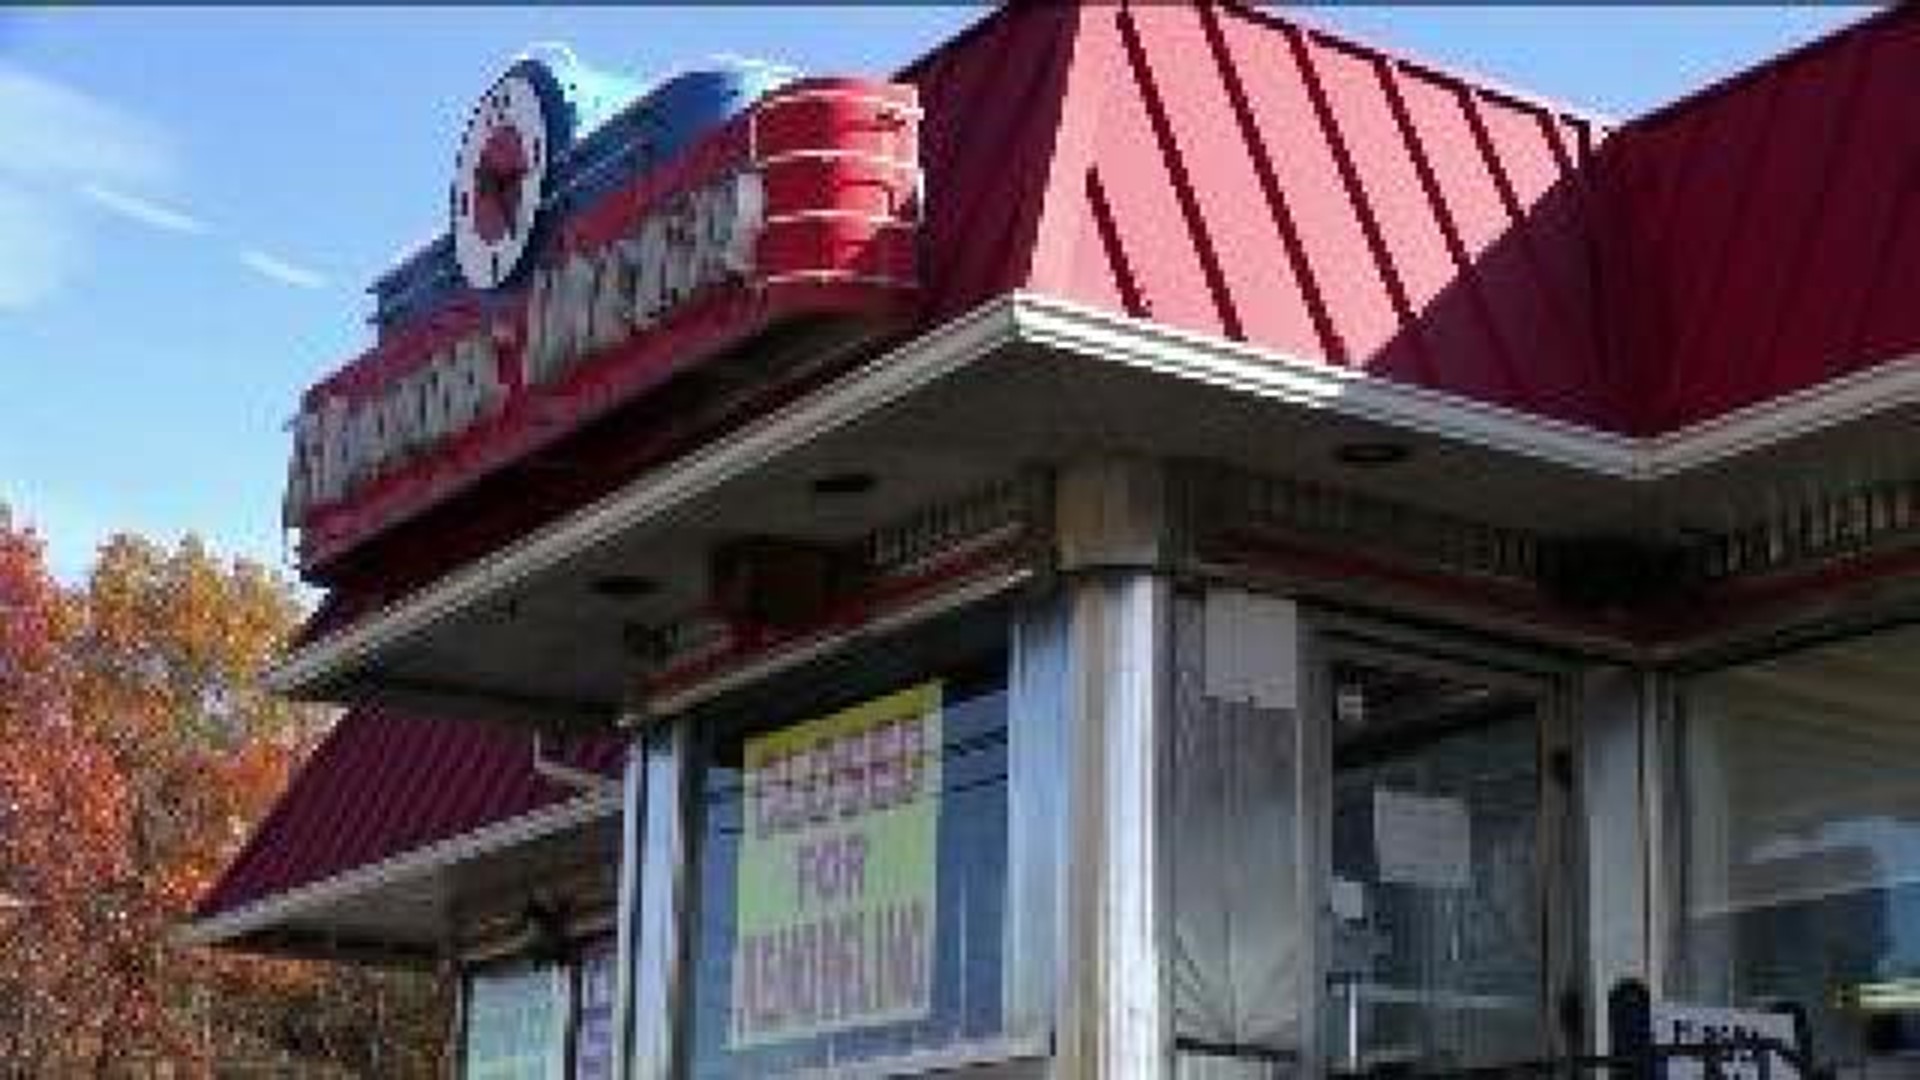 Moosic Diner Closed For Renovations, Managers Open New Place